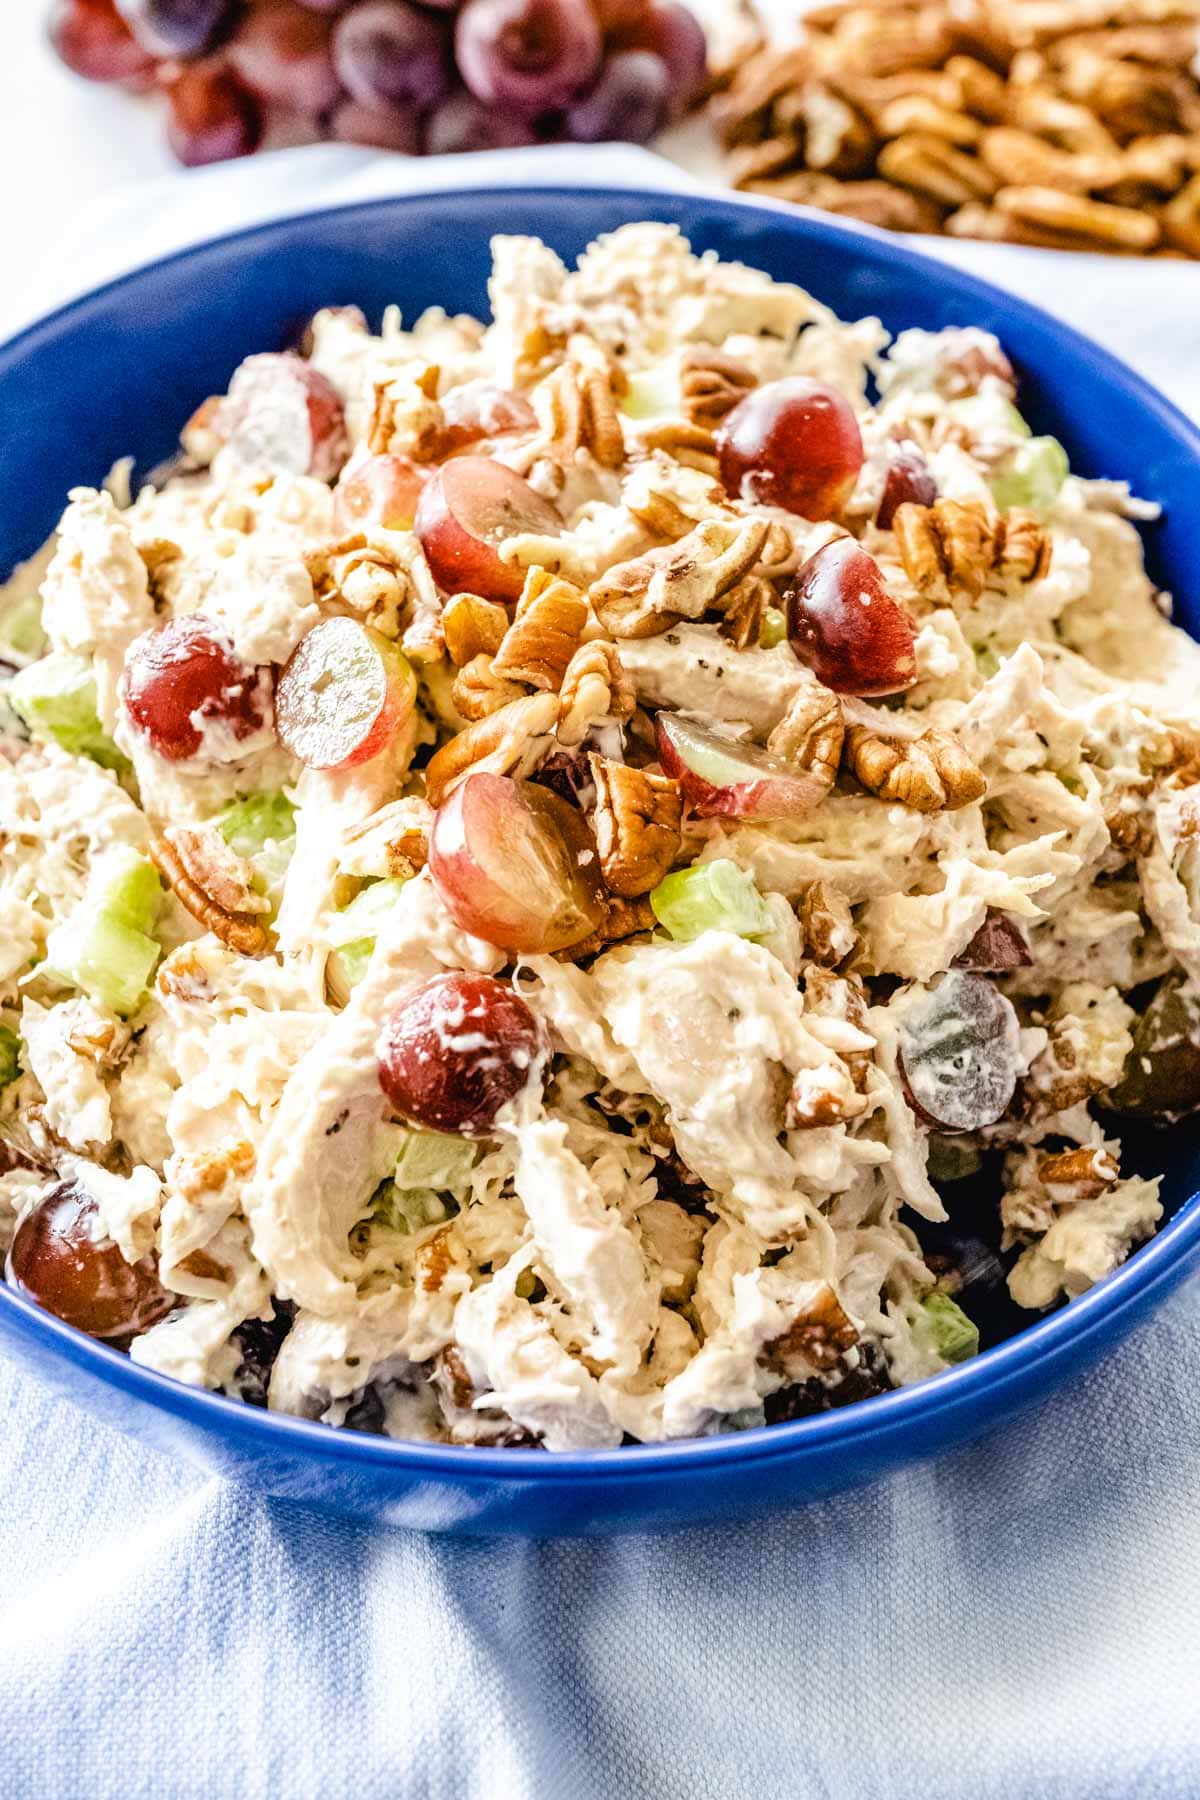 A bright blue bowl filled with chicken salad with grapes, pecans, celery tossed in mayo.